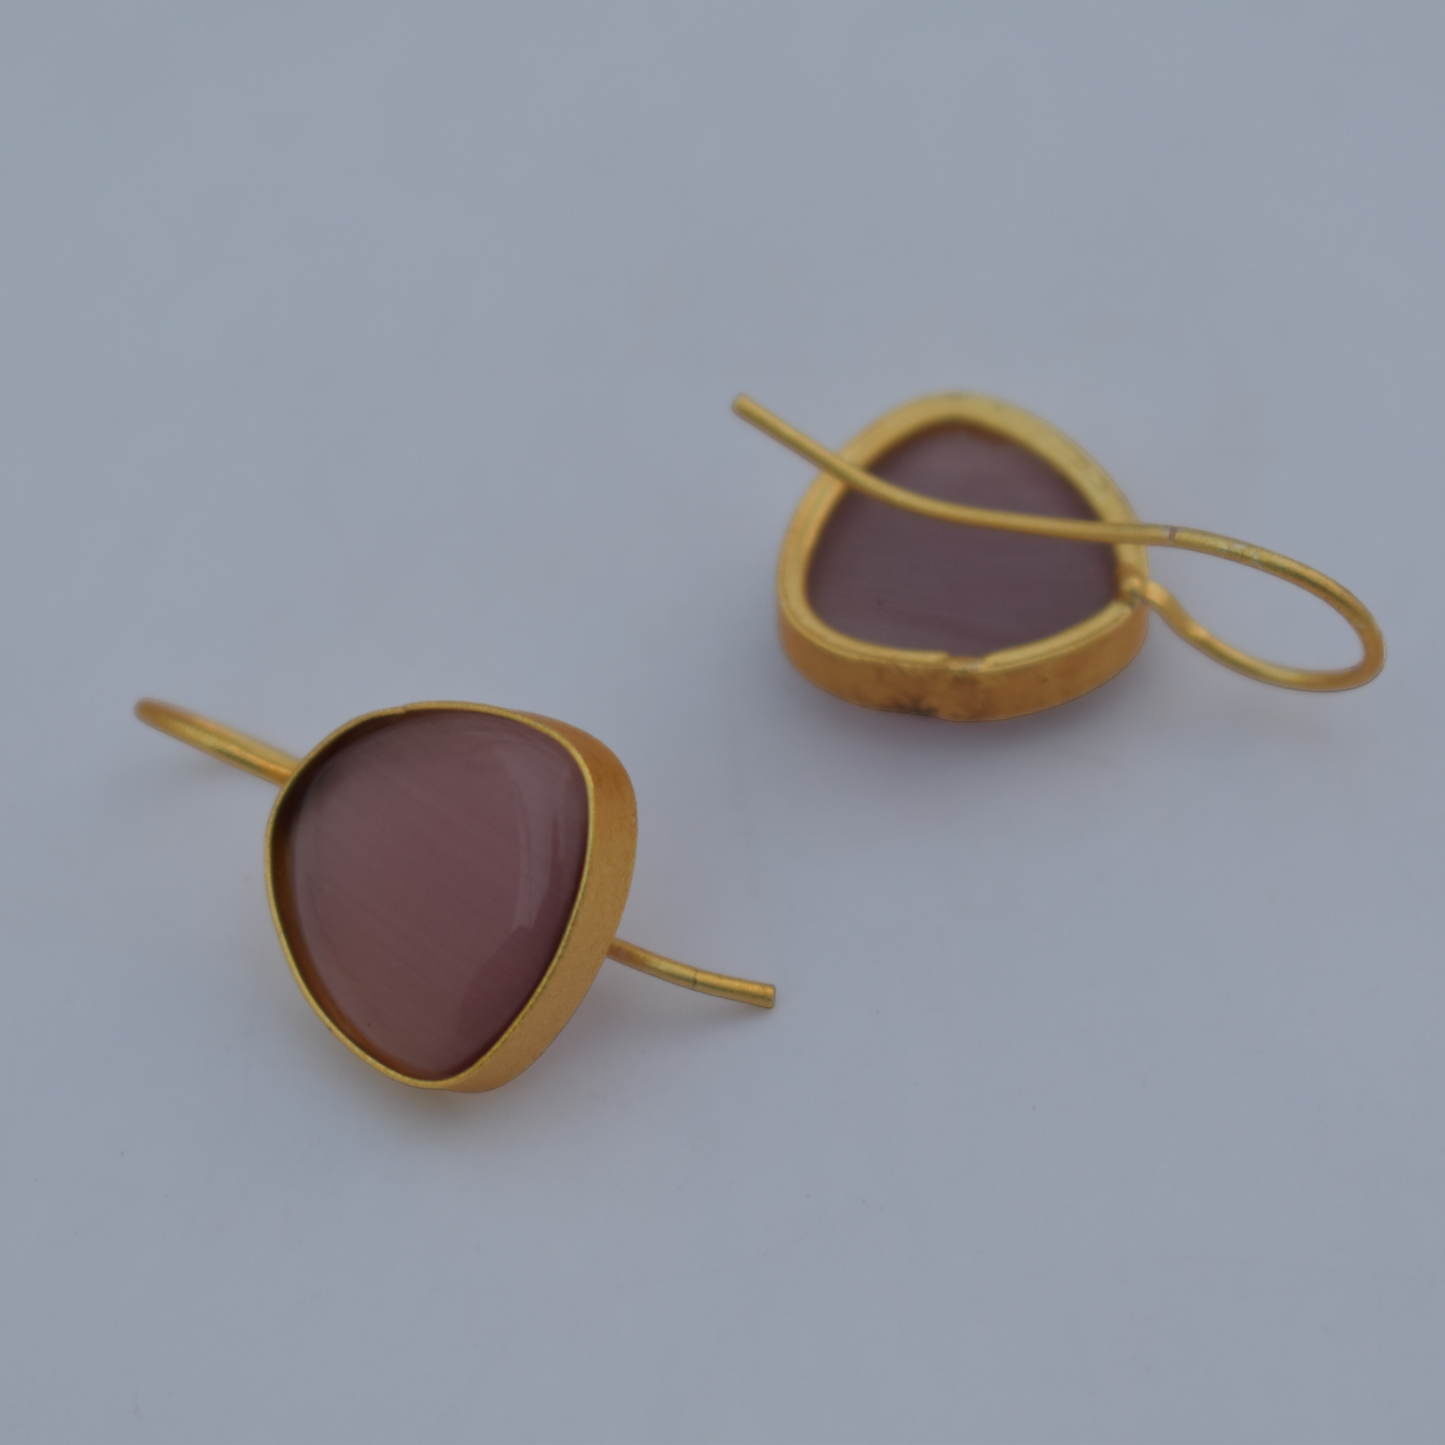 A pair of goldplated stone earing